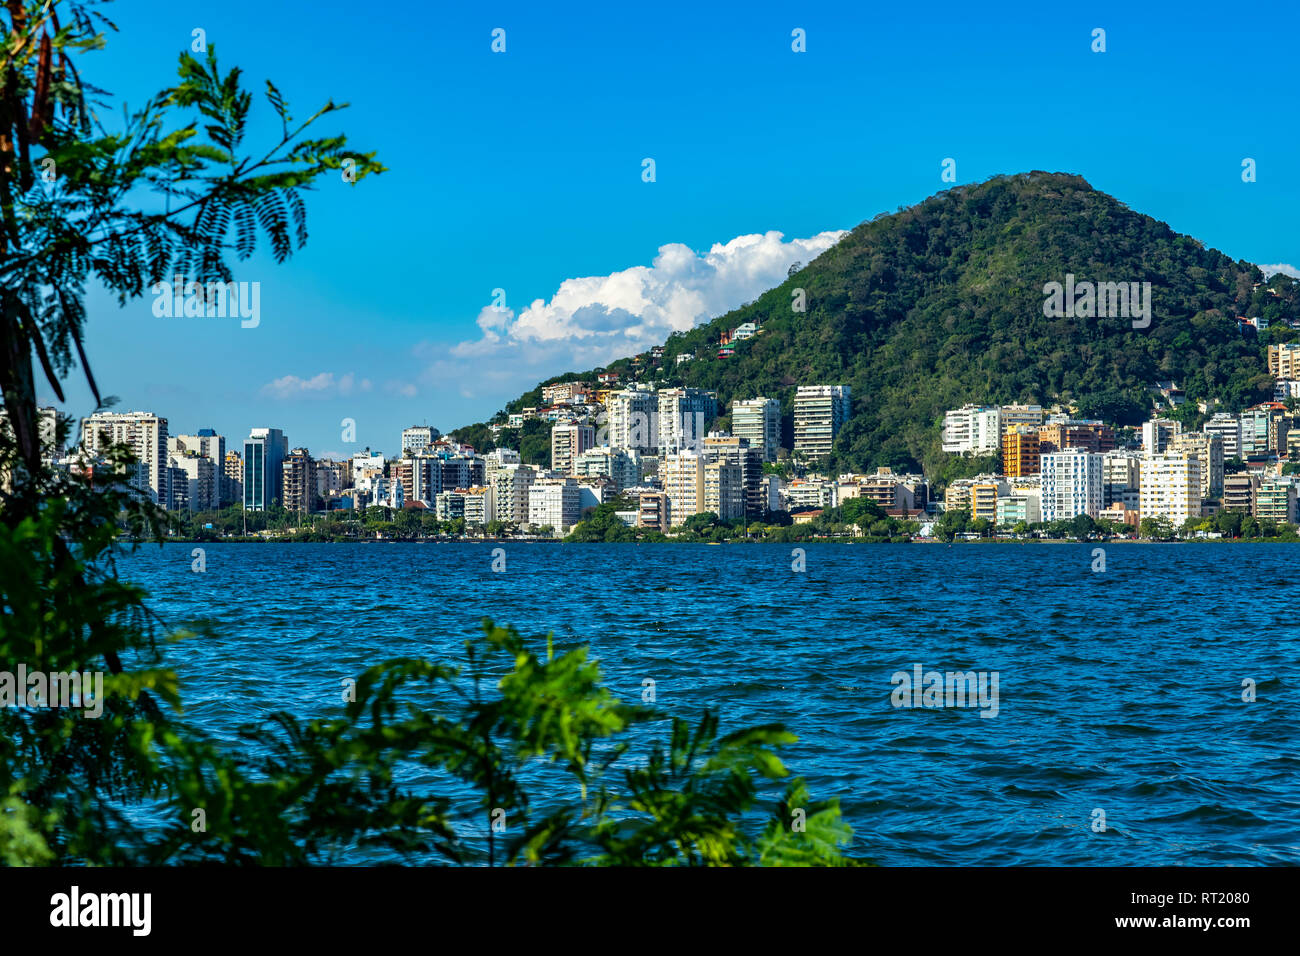 Most expensive apartments in the world. Wonderful places in the world. Lagoon and neighborhood of Ipanema, in Rio de Janeiro, Brazil, South America. Stock Photo